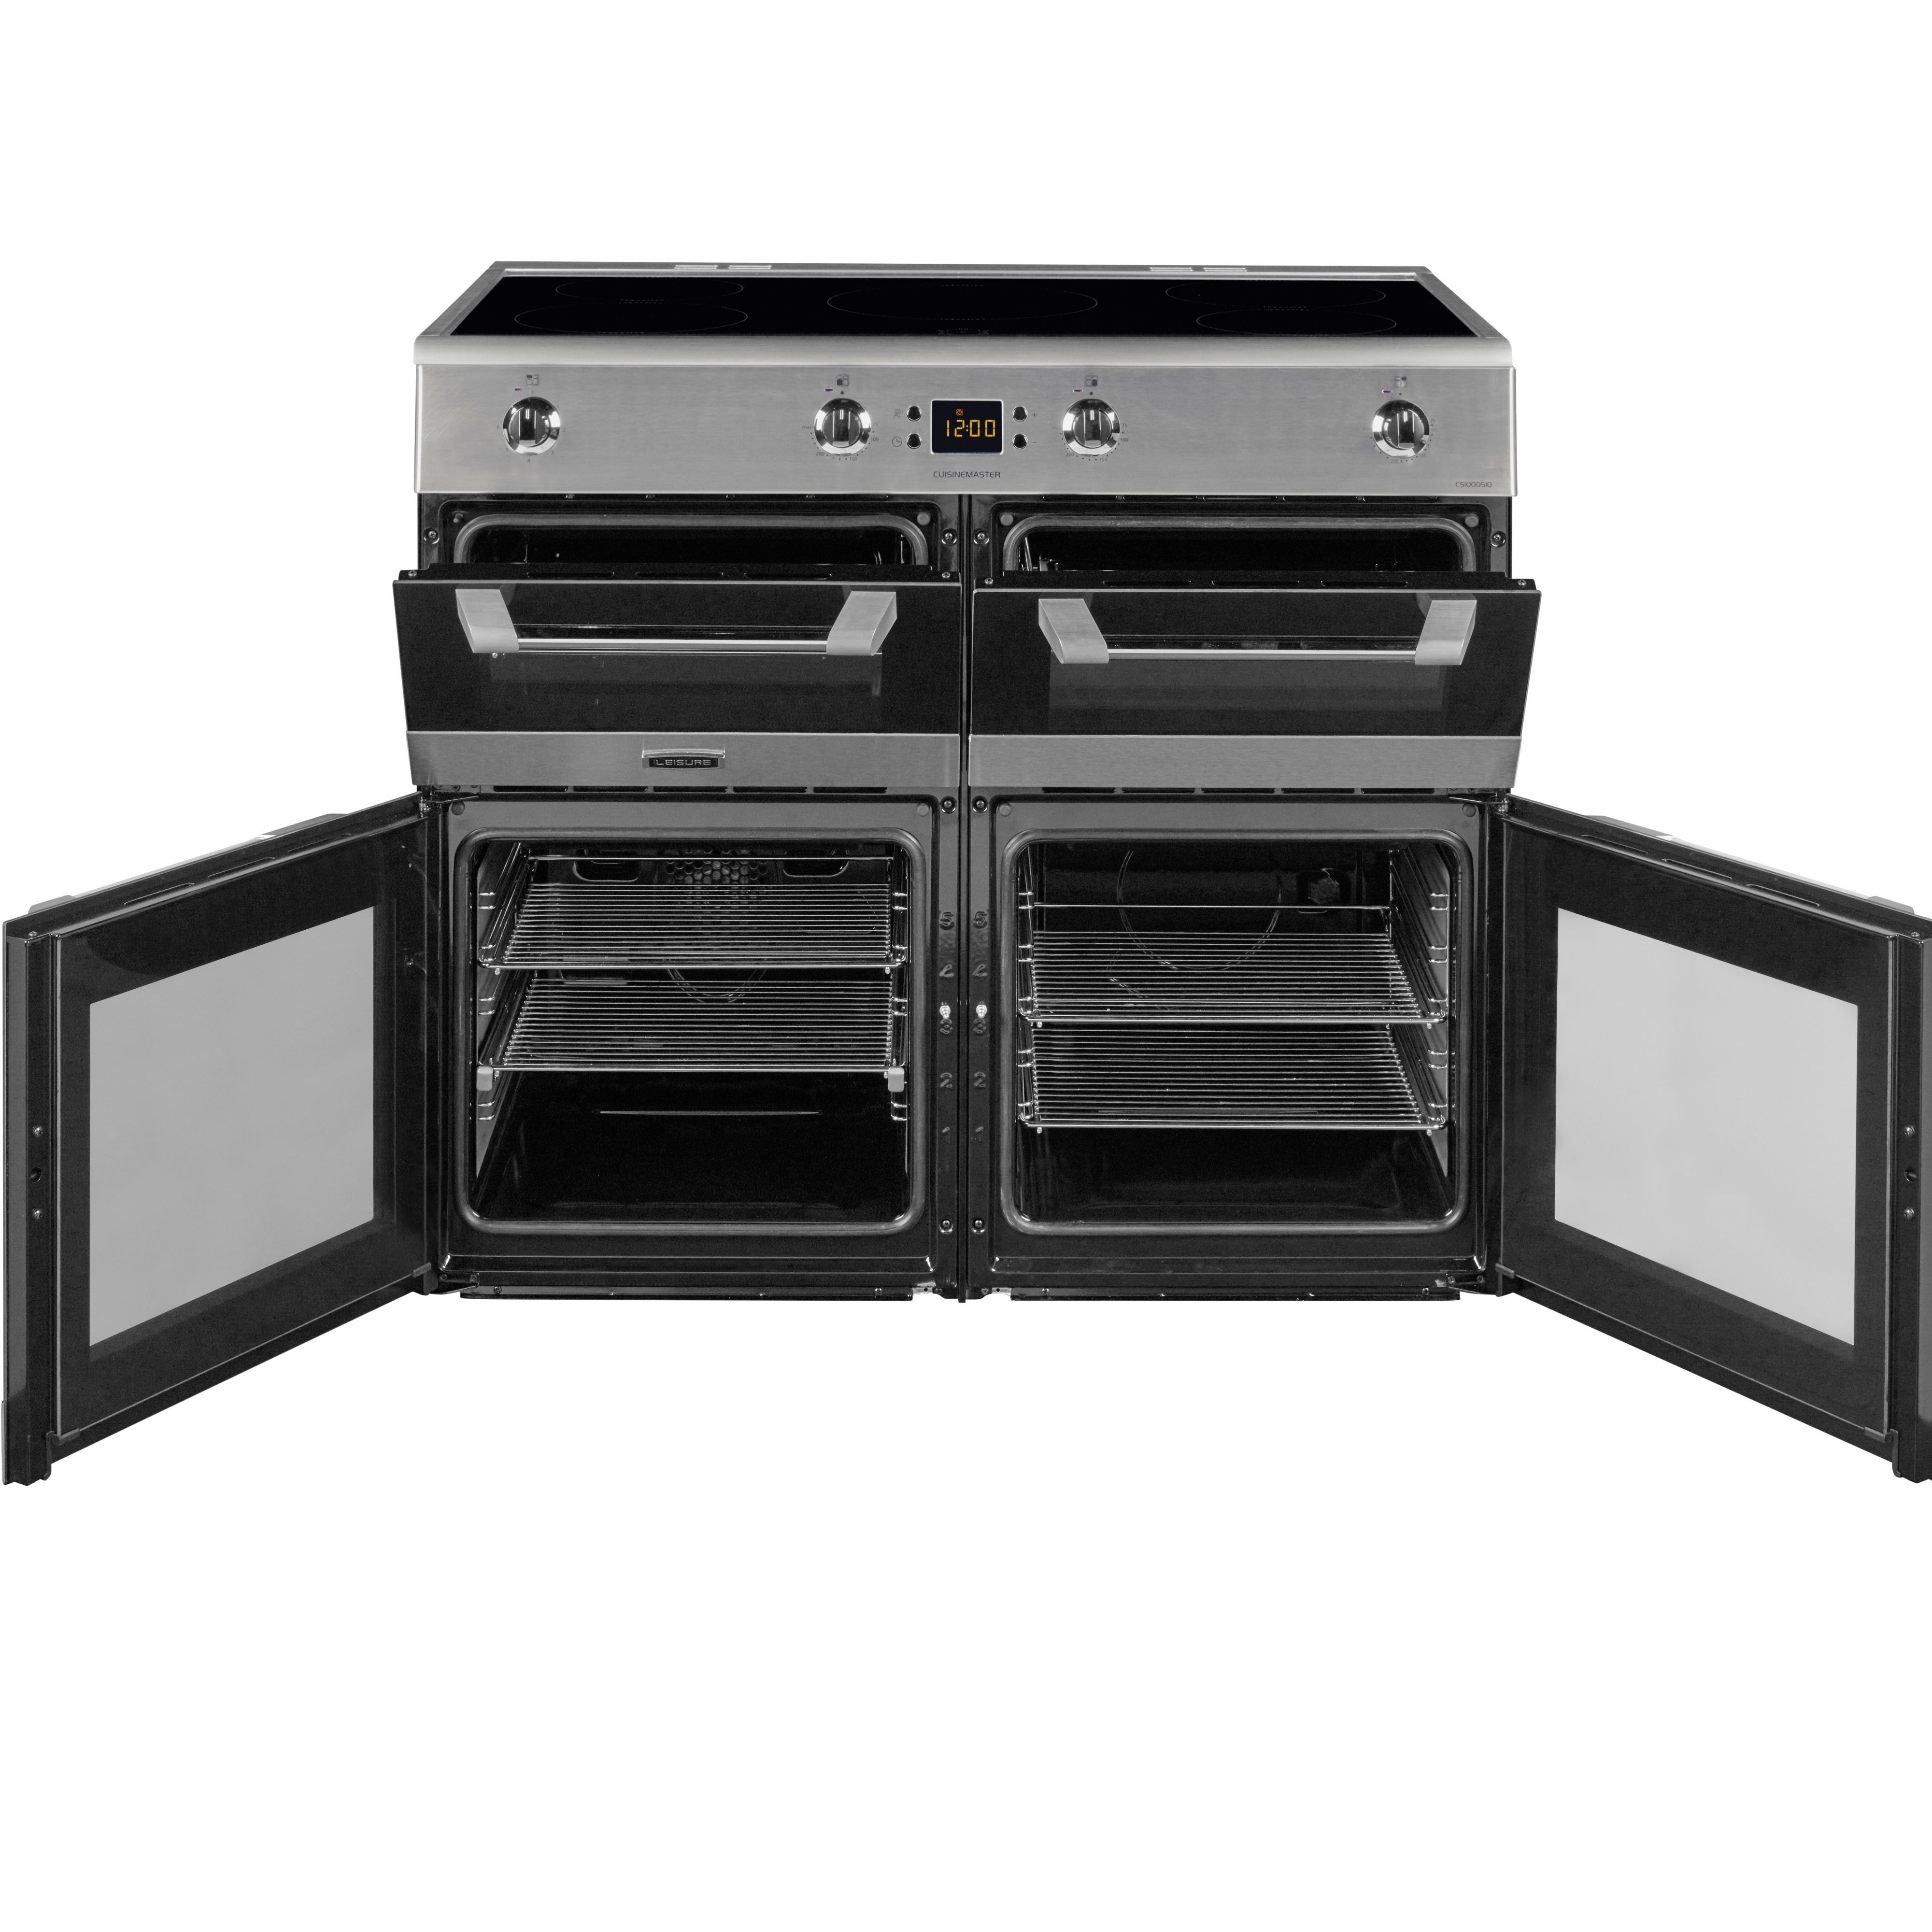 Leisure CS100D510X Freestanding Electric Range cooker with Induction Hob - Stainless steel effect